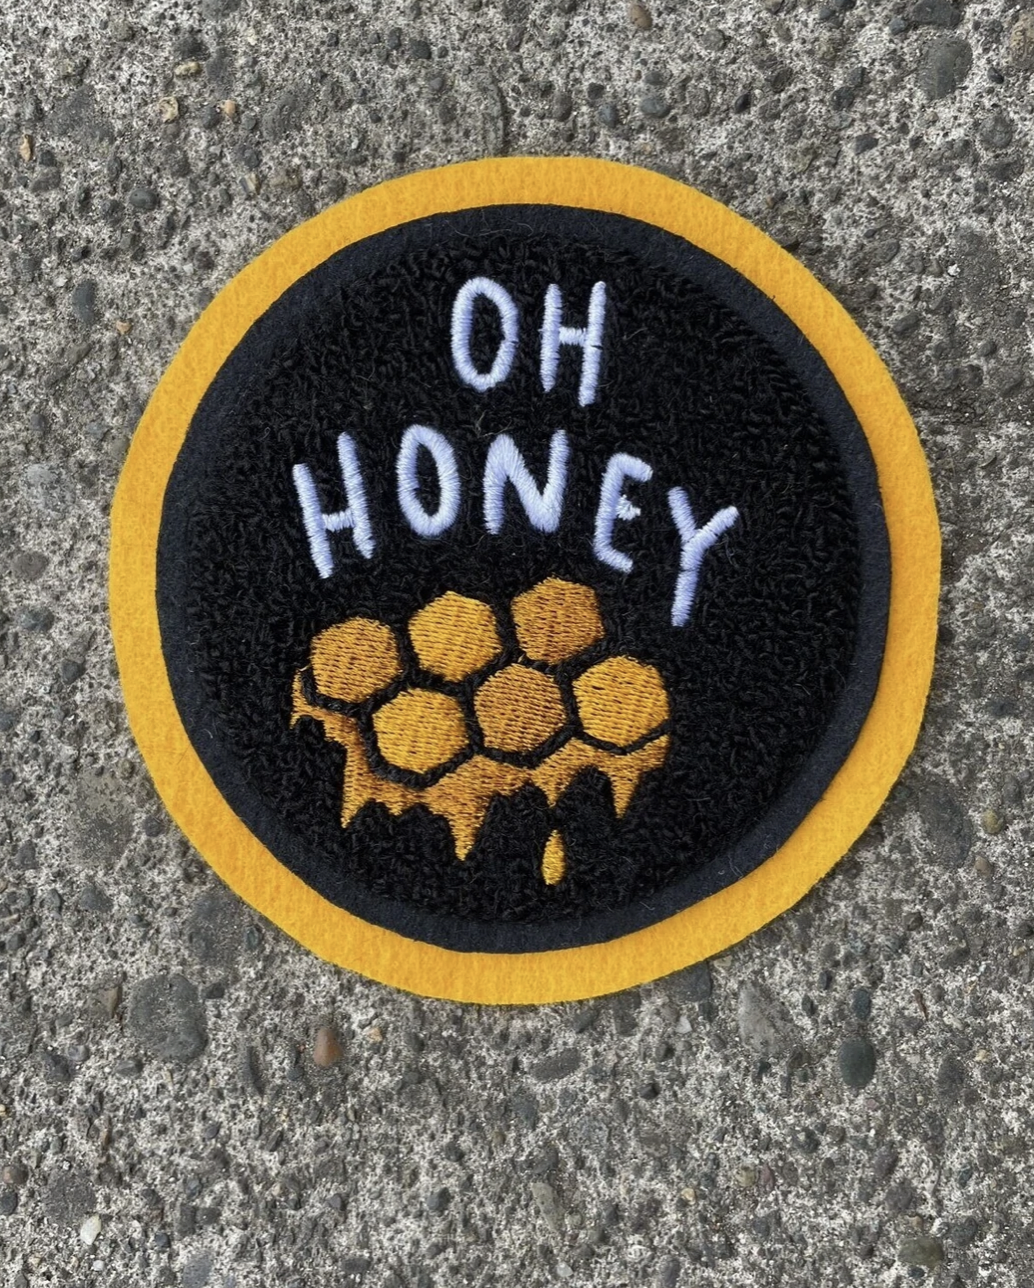 Black patch with yellow edge that says "Oh honey" in white letters with yellow honey comb underneath.